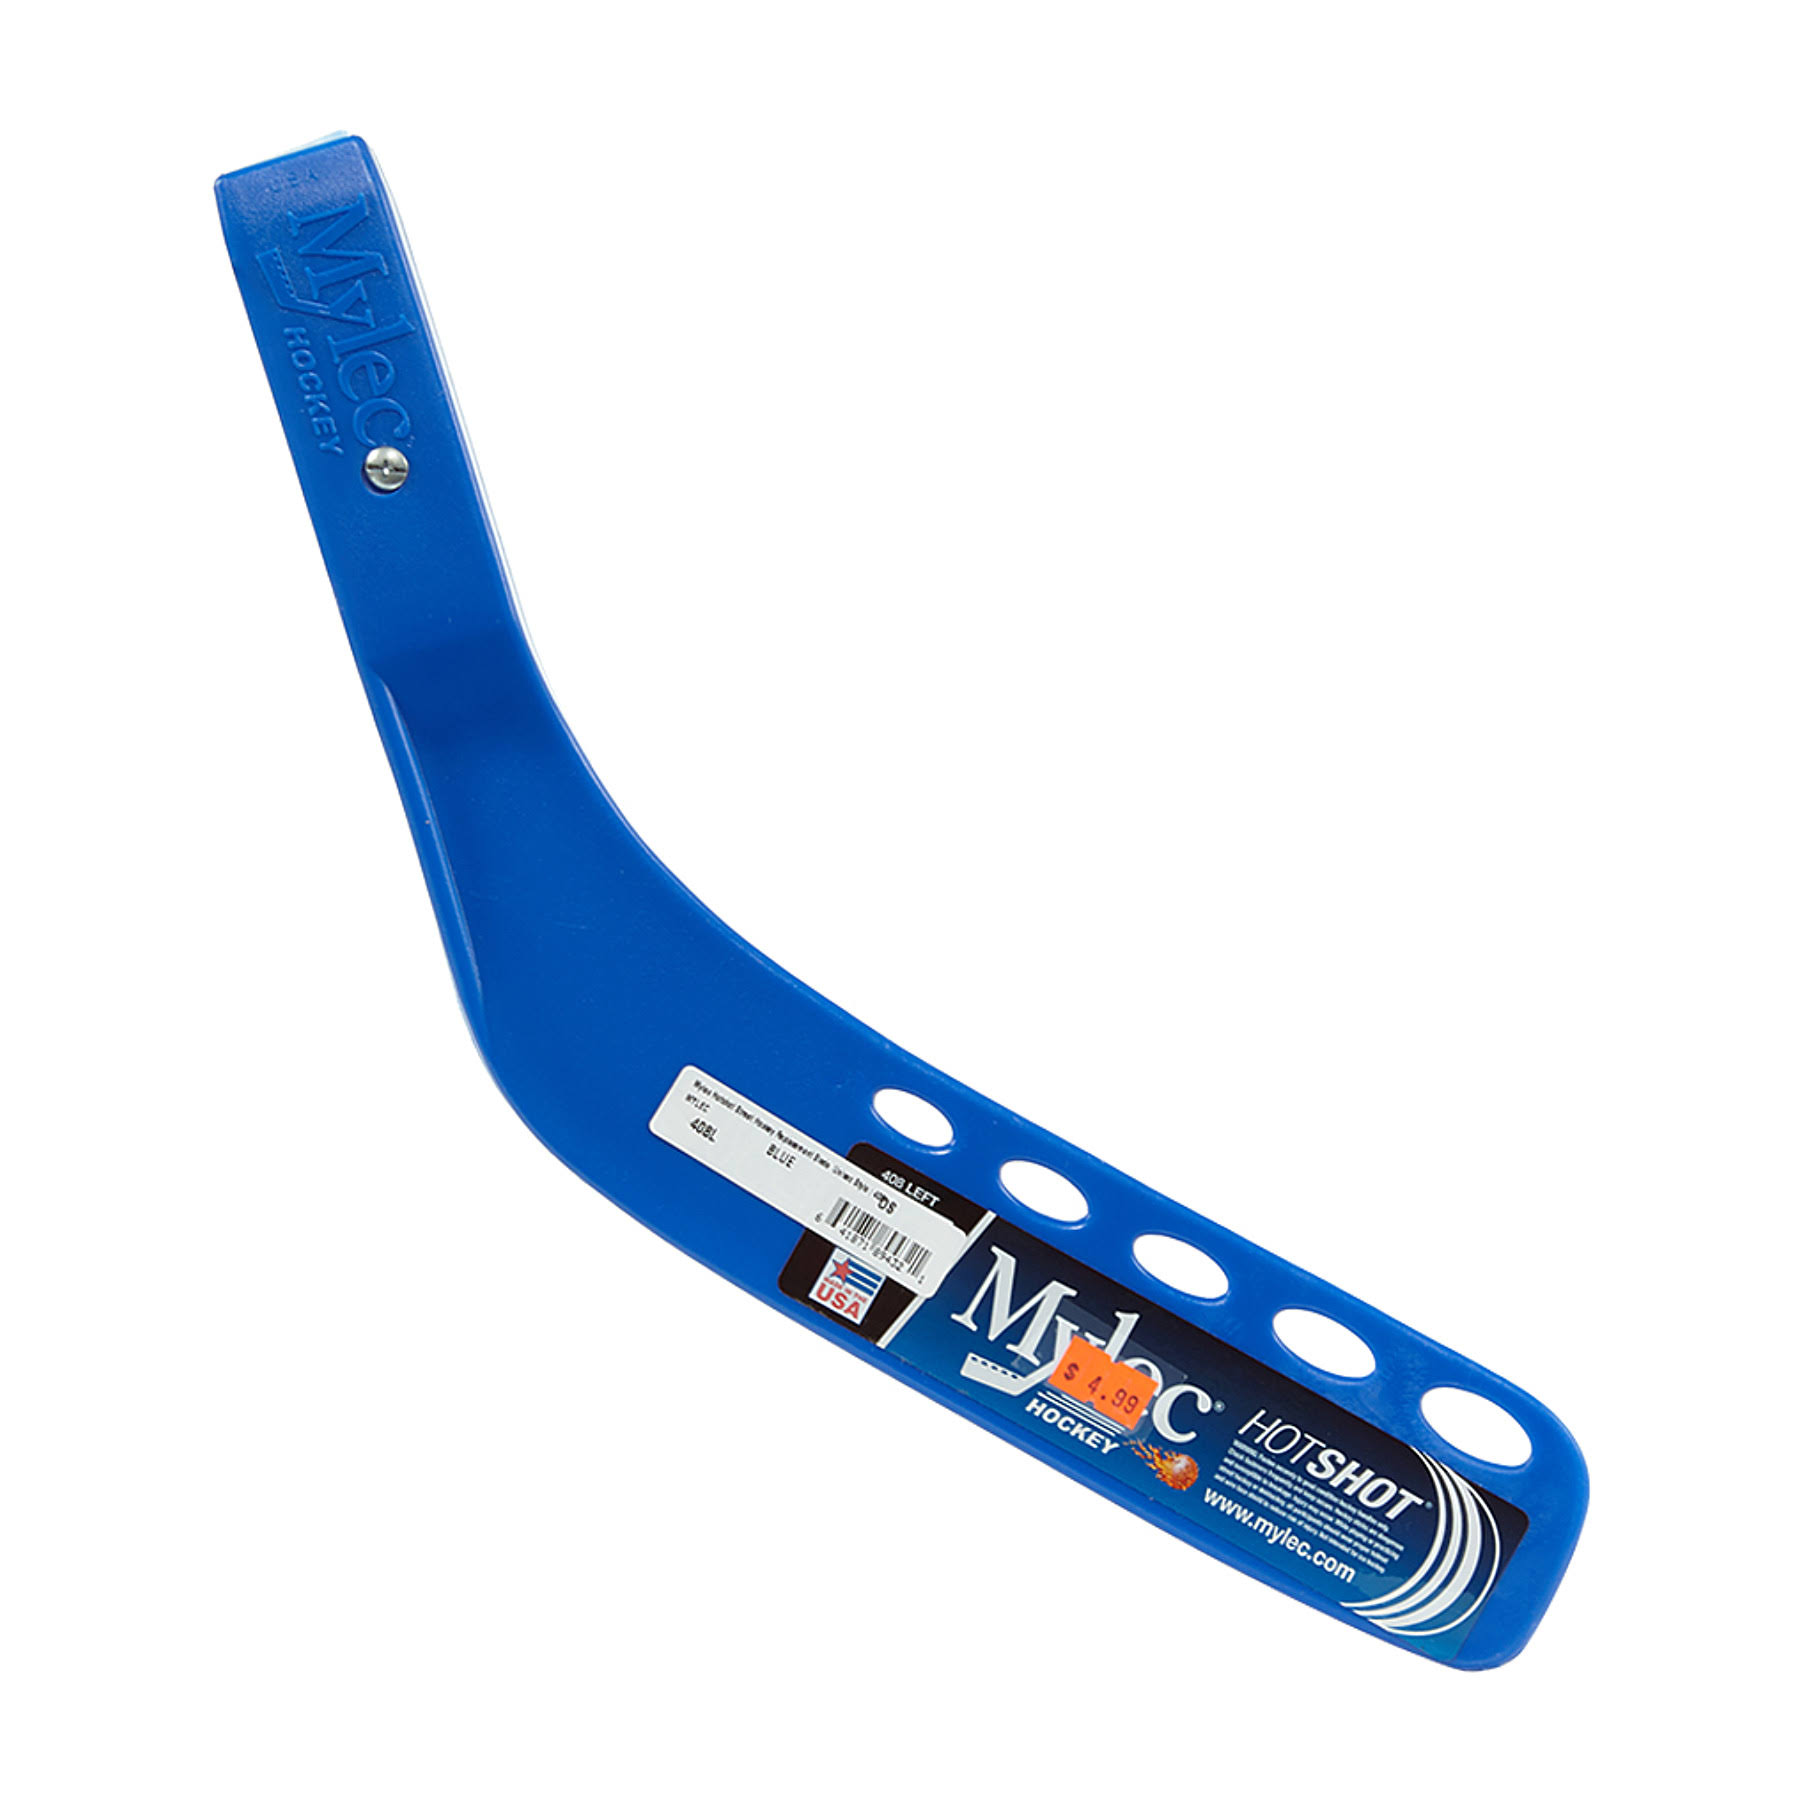 Details about  / FRANKLIN SPORTS SHOT ZONE REPLACEMENT SENIOR STREET HOCKEY BLADE